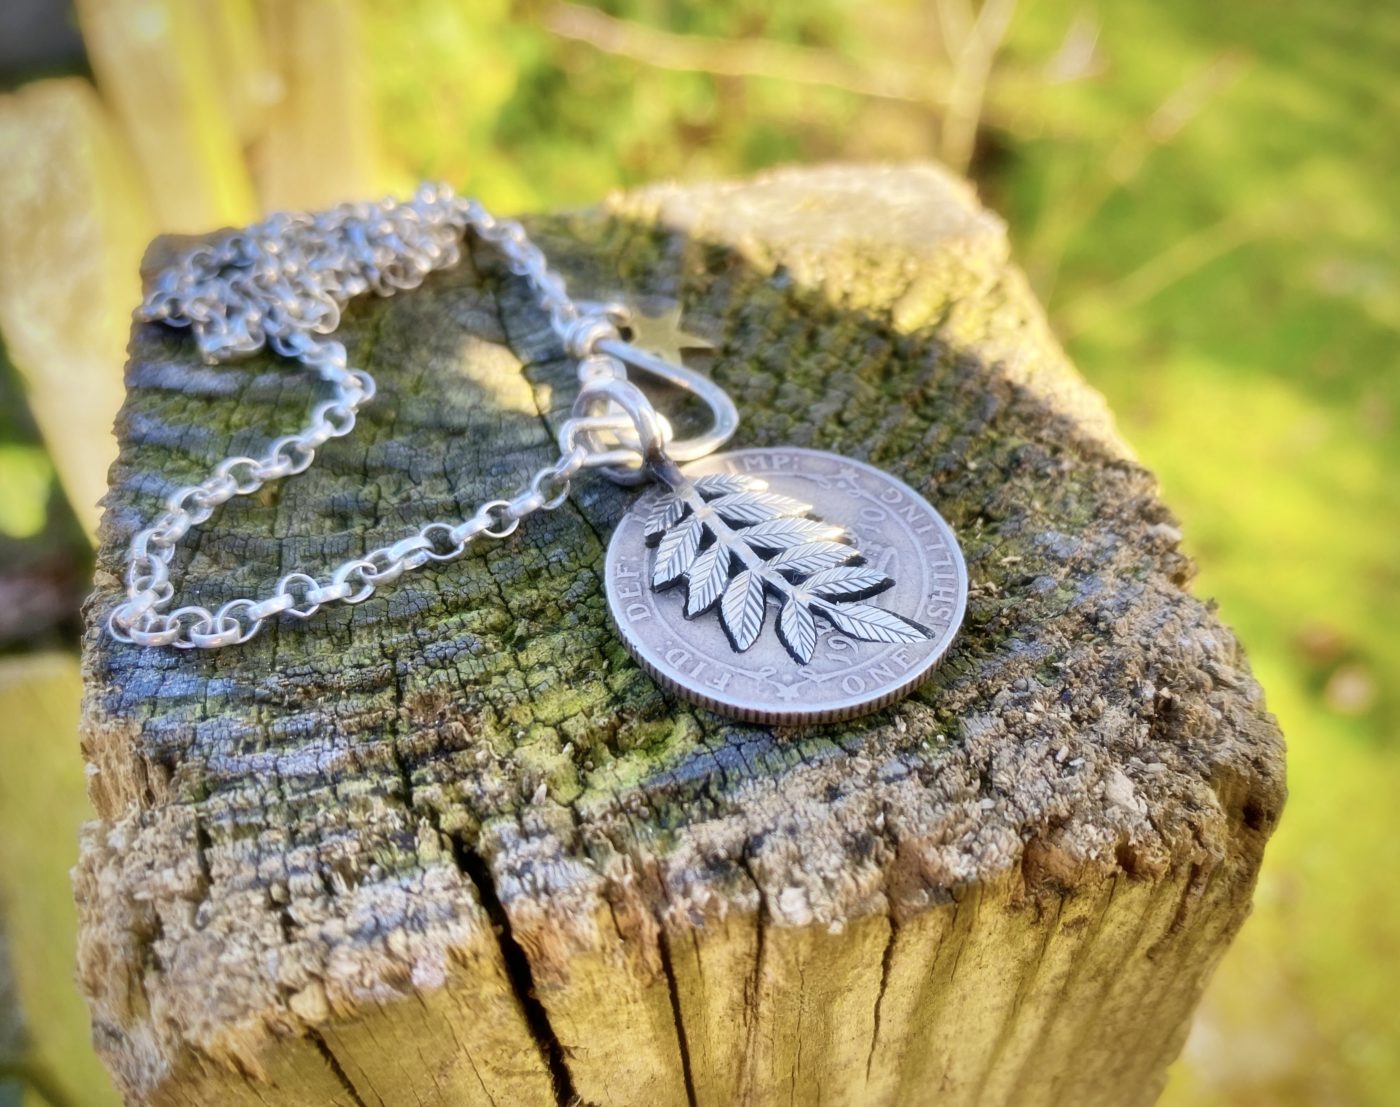 Rowan tree leaves necklace ethical jewellery made from recycled silver coins.